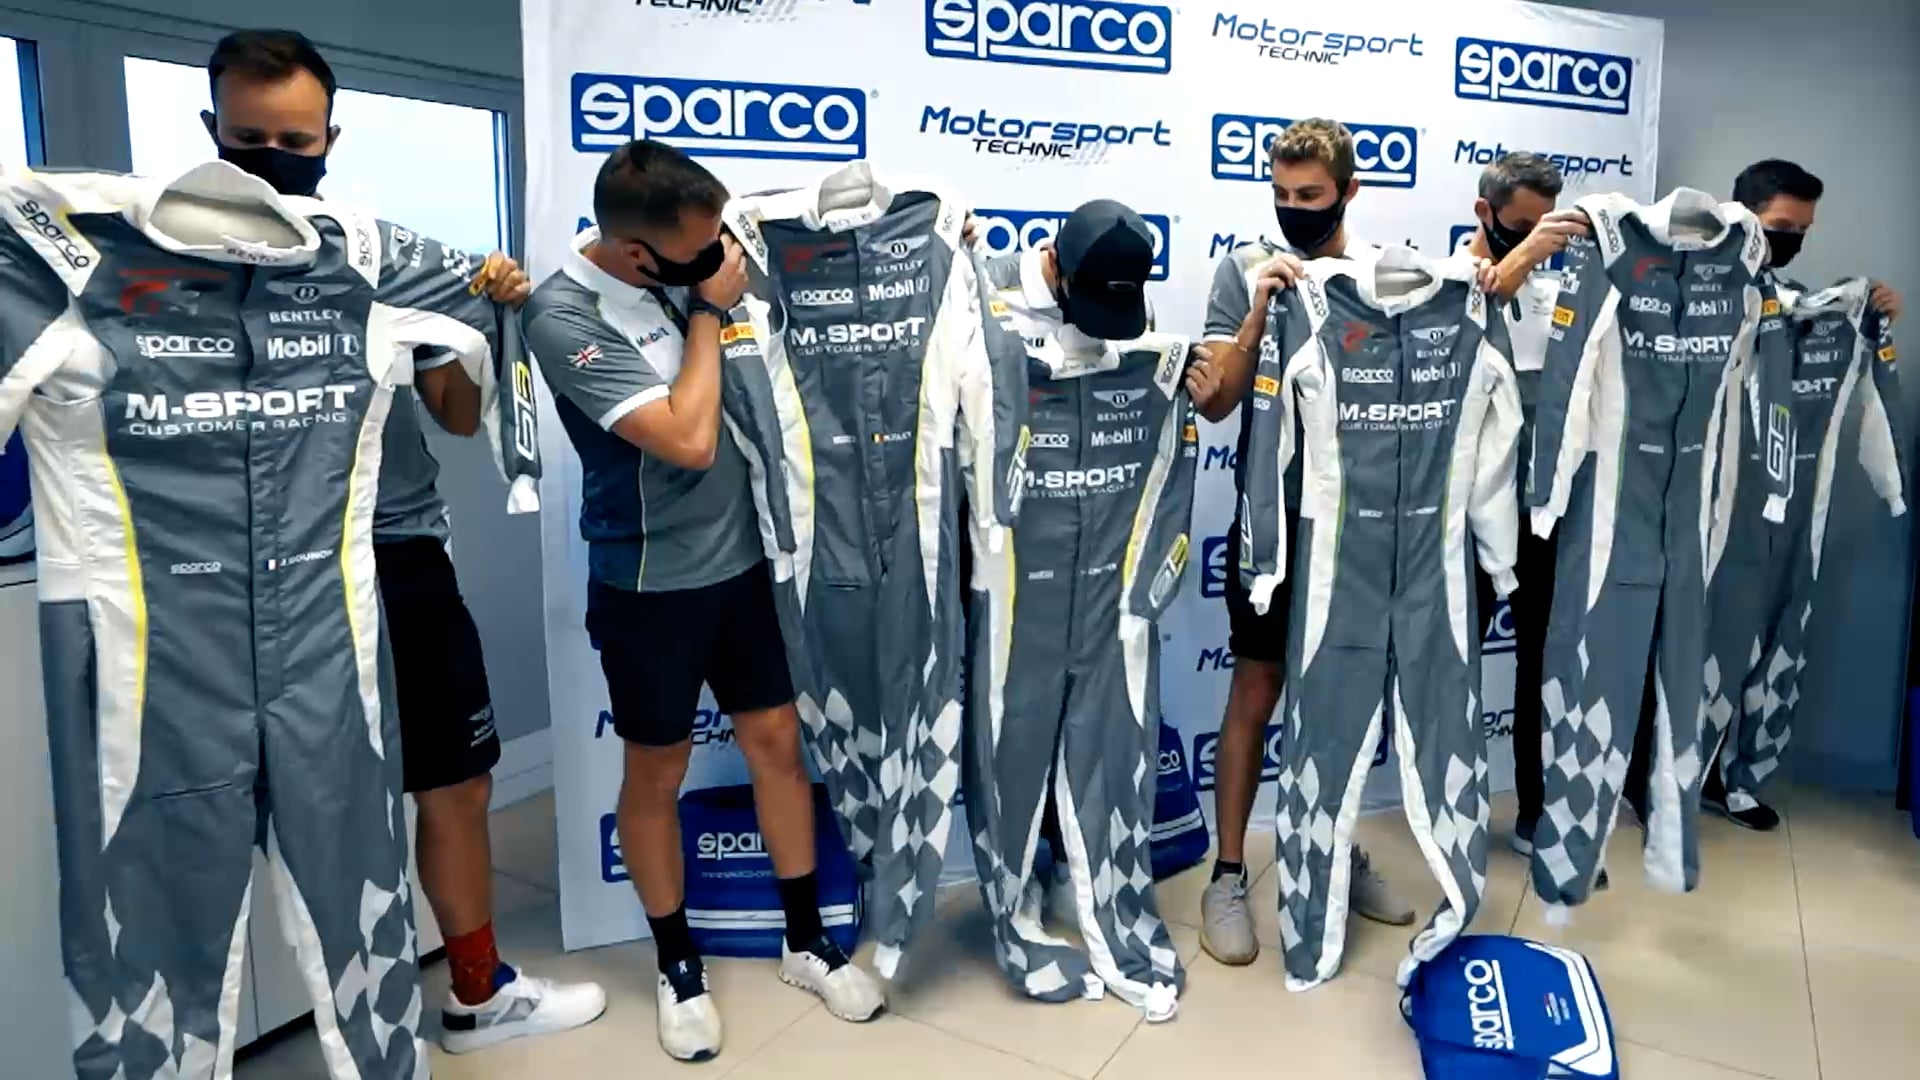 SPARCO EVENT